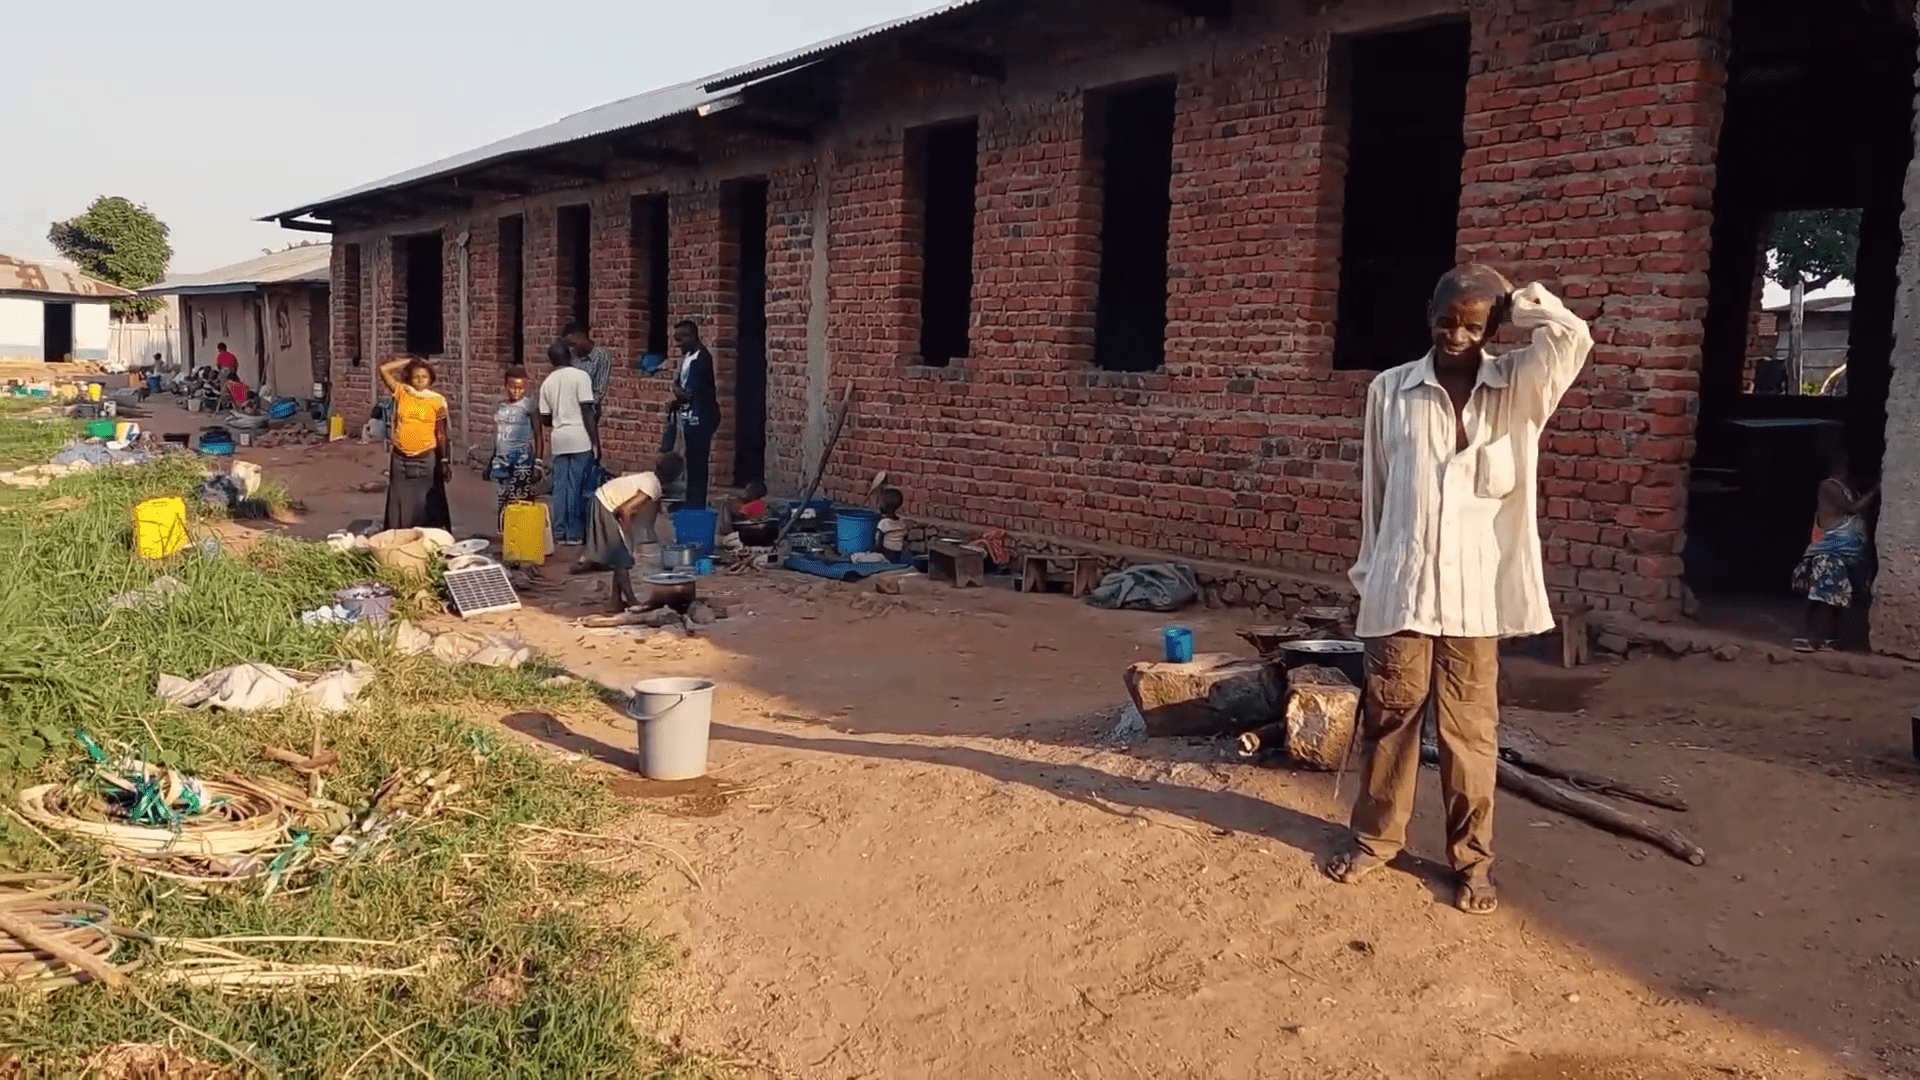 Thanks to the charity Open Doors displaced Christians in Komanda in the Democratic Republic of Congo have received food and other relief aid.